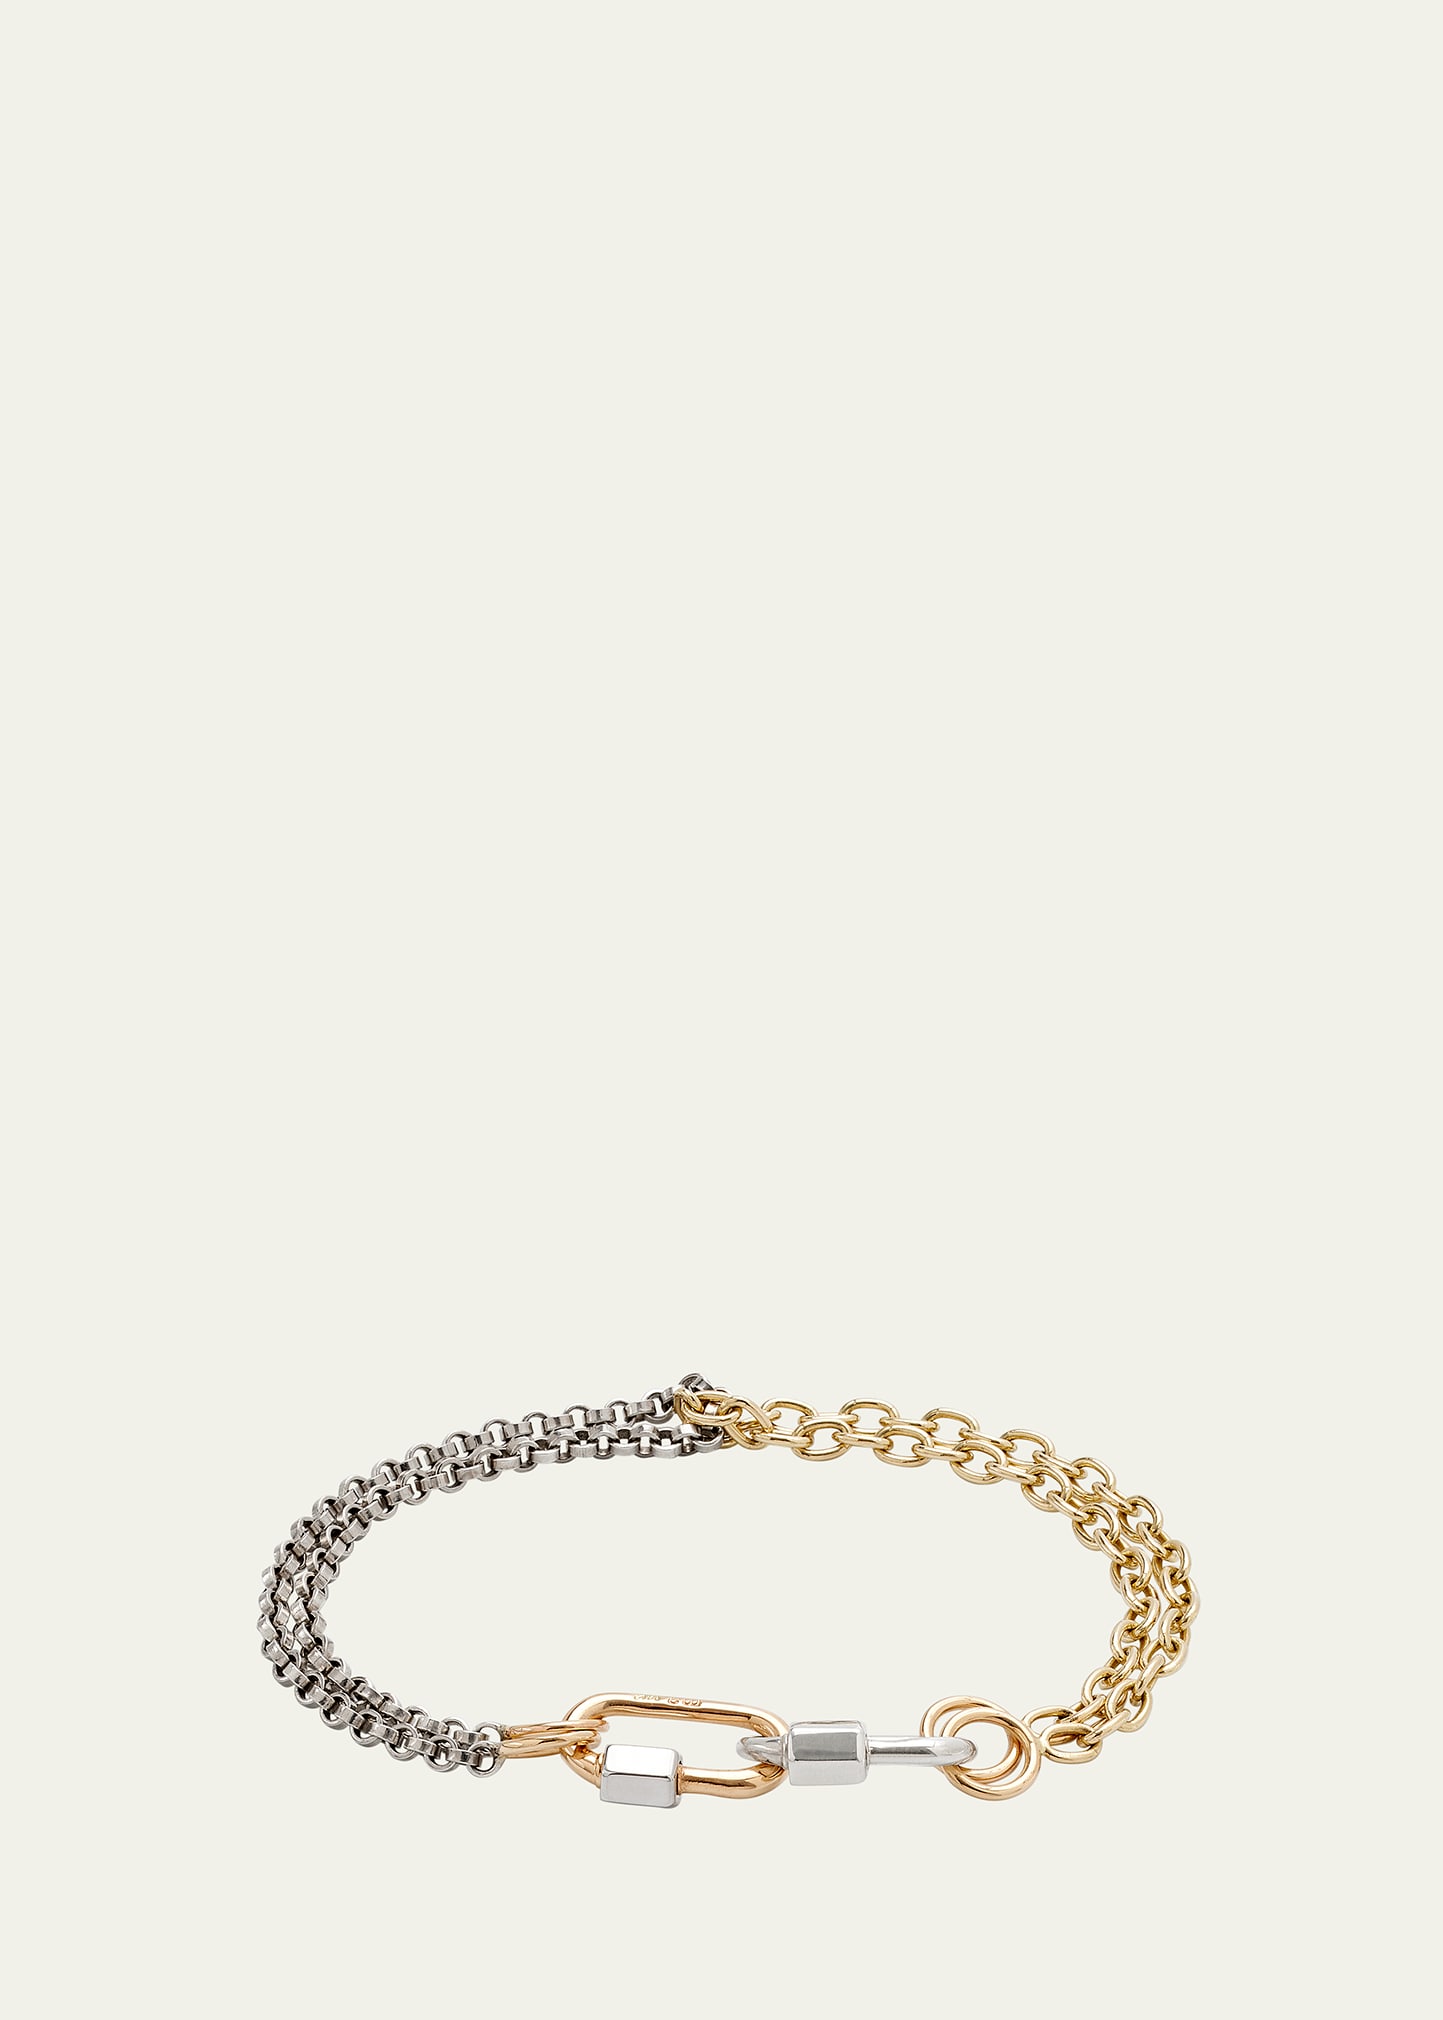 Marla Aaron Sterling Silver and 14k Gold Rolo Chain and Lock Bracelet